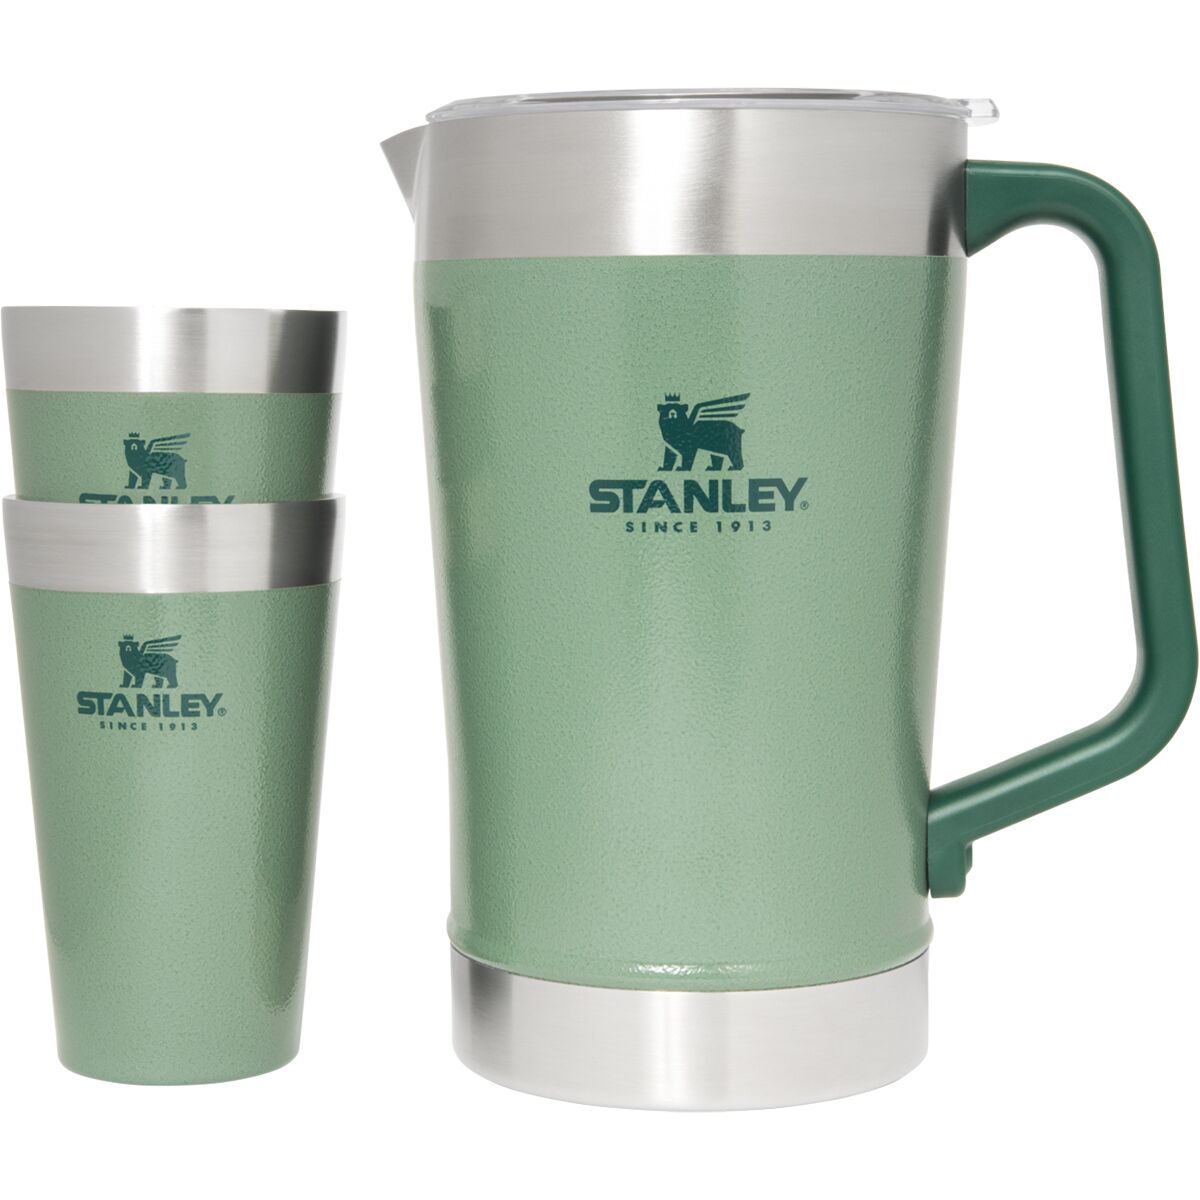 Stanley - Built for backyard sangria, iced tea in the RV, seasonal batch  cocktails tableside, or your own creation. What would you serve up in the  Stay Chill Pitcher? Shop the new